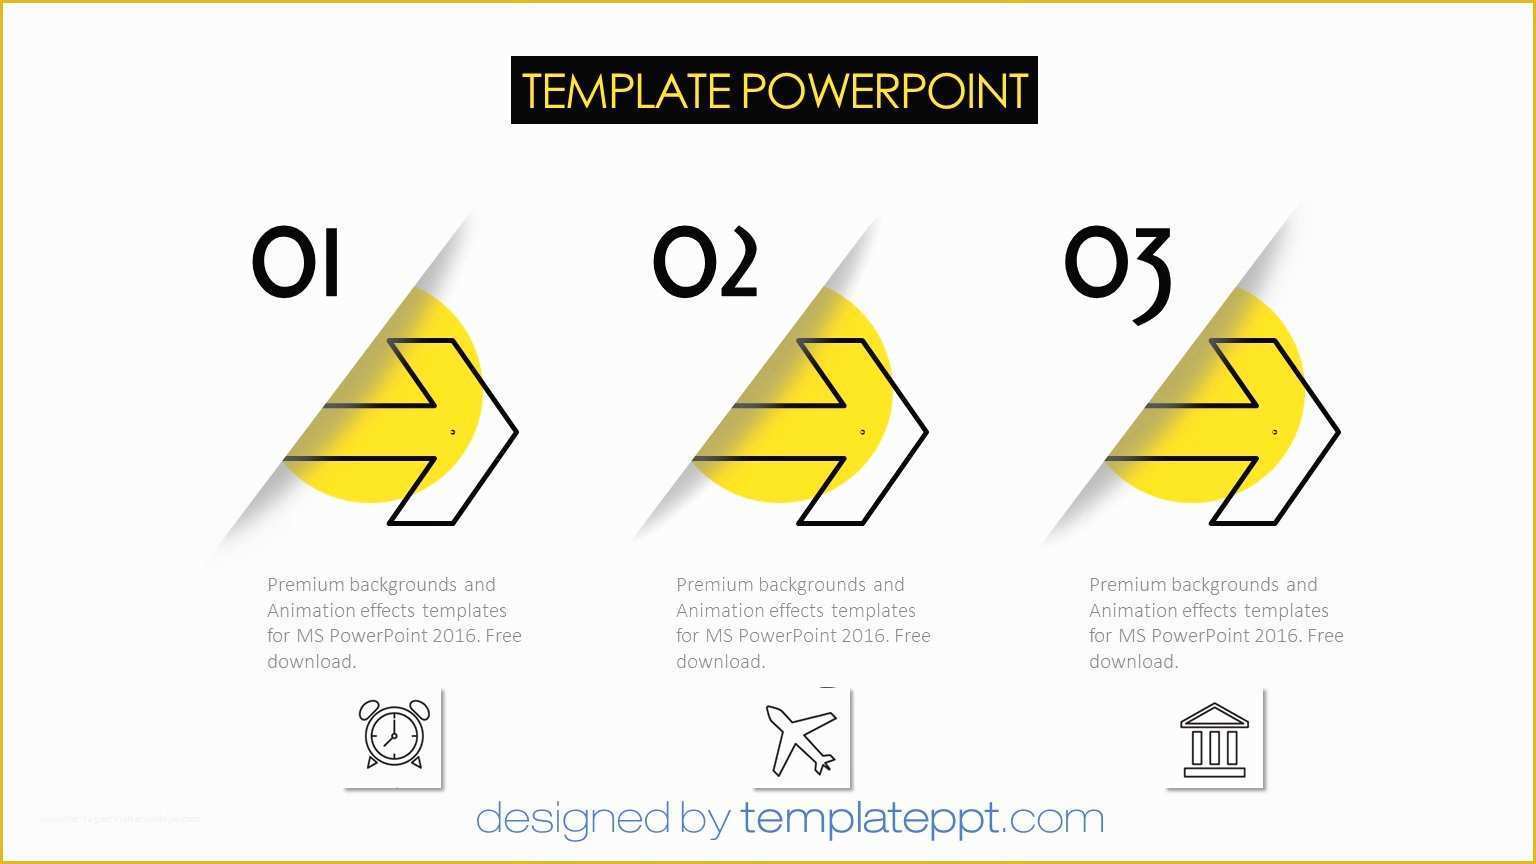 Best Animated Ppt Templates Free Download Of Presenter Media Yourbackupemployee fortable Animated